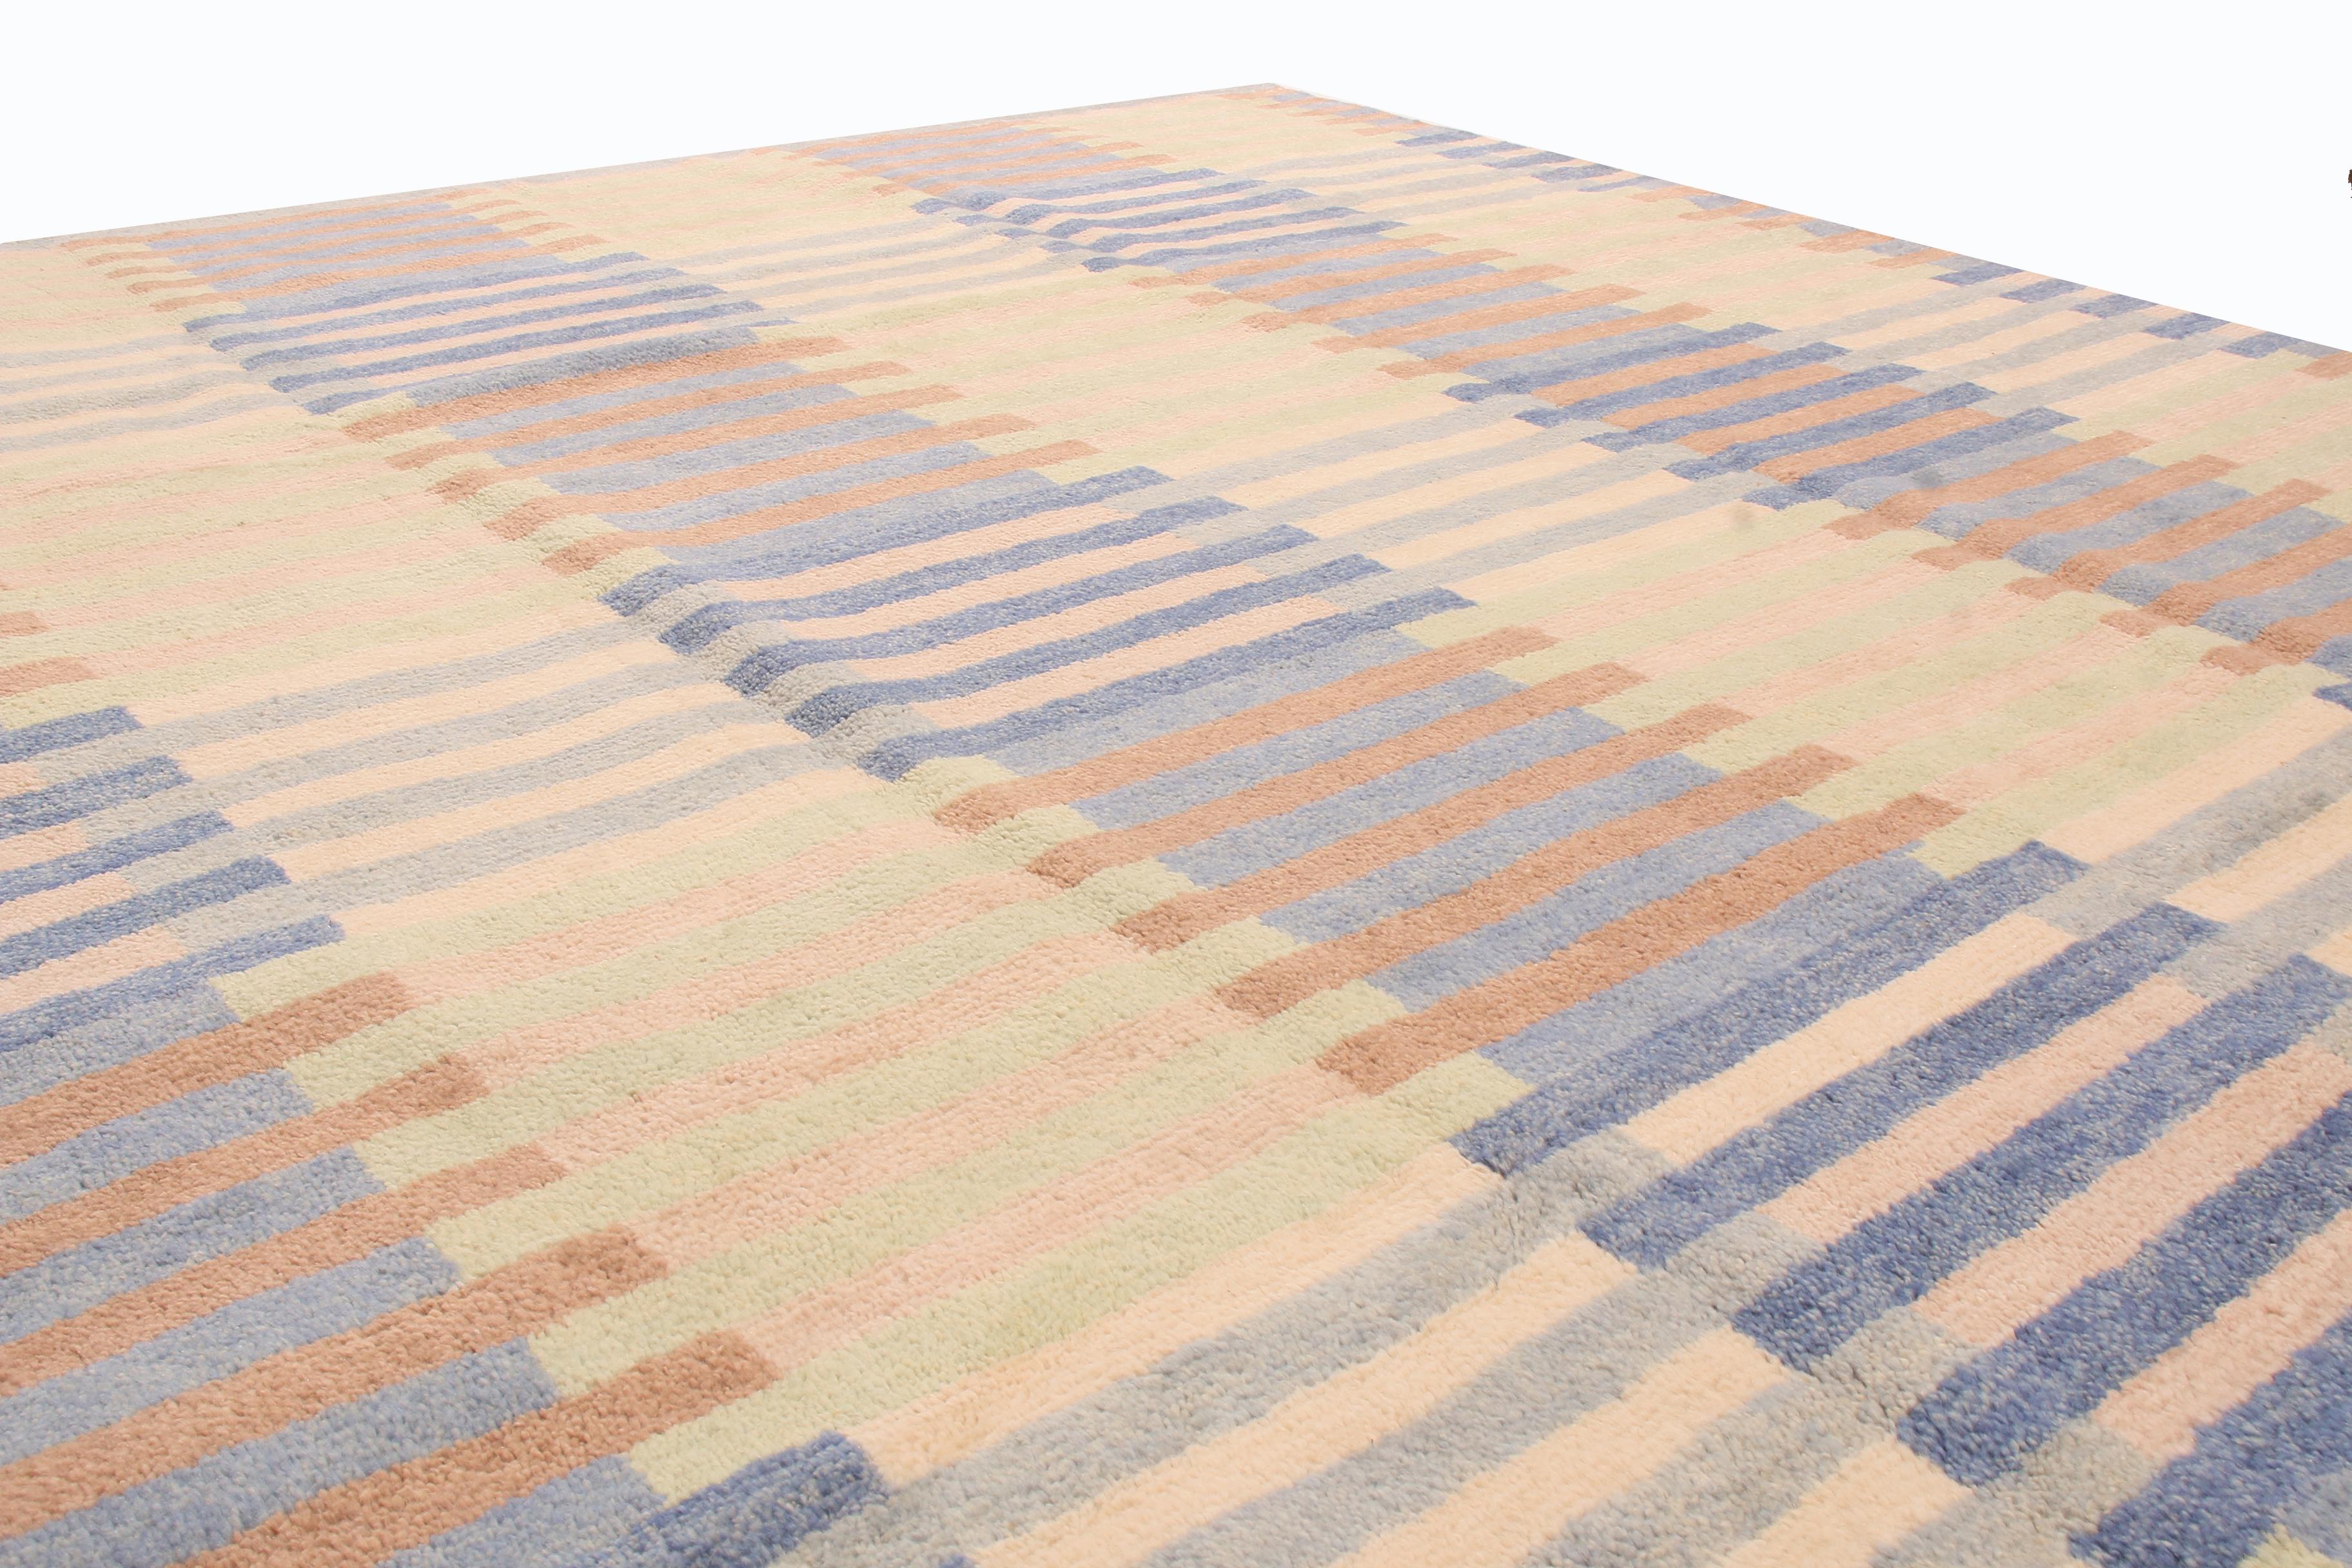 Originating from India, this geometric hand knotted wool rug employs a borderless, contemporary all over field design strongly resembling antique and vintage Bauhaus patterns. The finely woven ocean blue, cream pink, brown, and green colourways